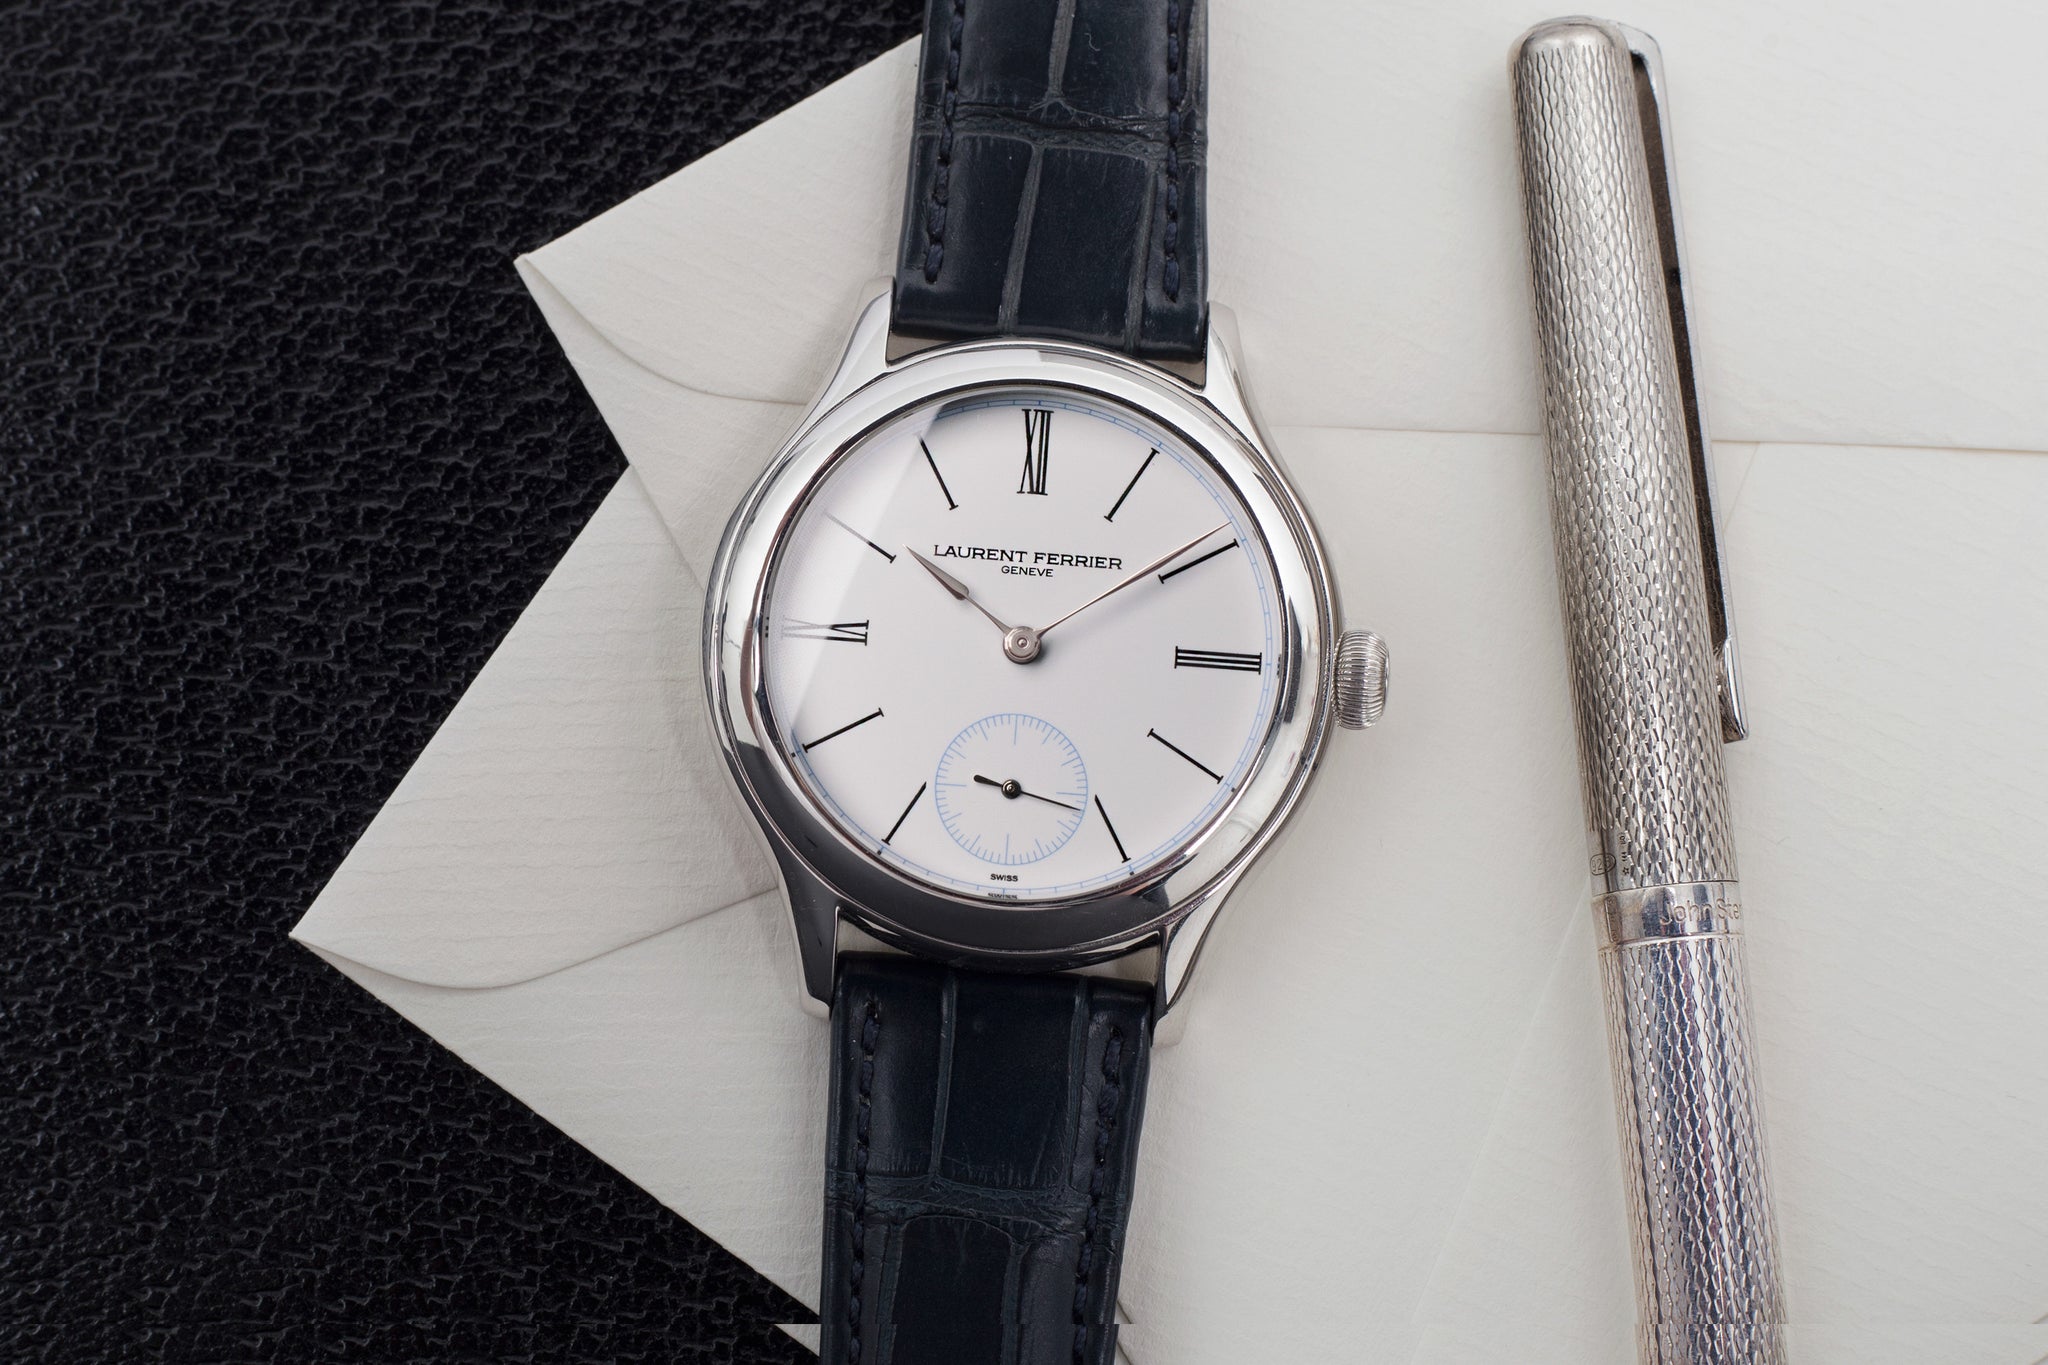 Laurent Ferrier Galet Micro-rotor LCF006 platinum enamel dial limited edition watch for sale online at A Collected Man London specialist independent watchmakers